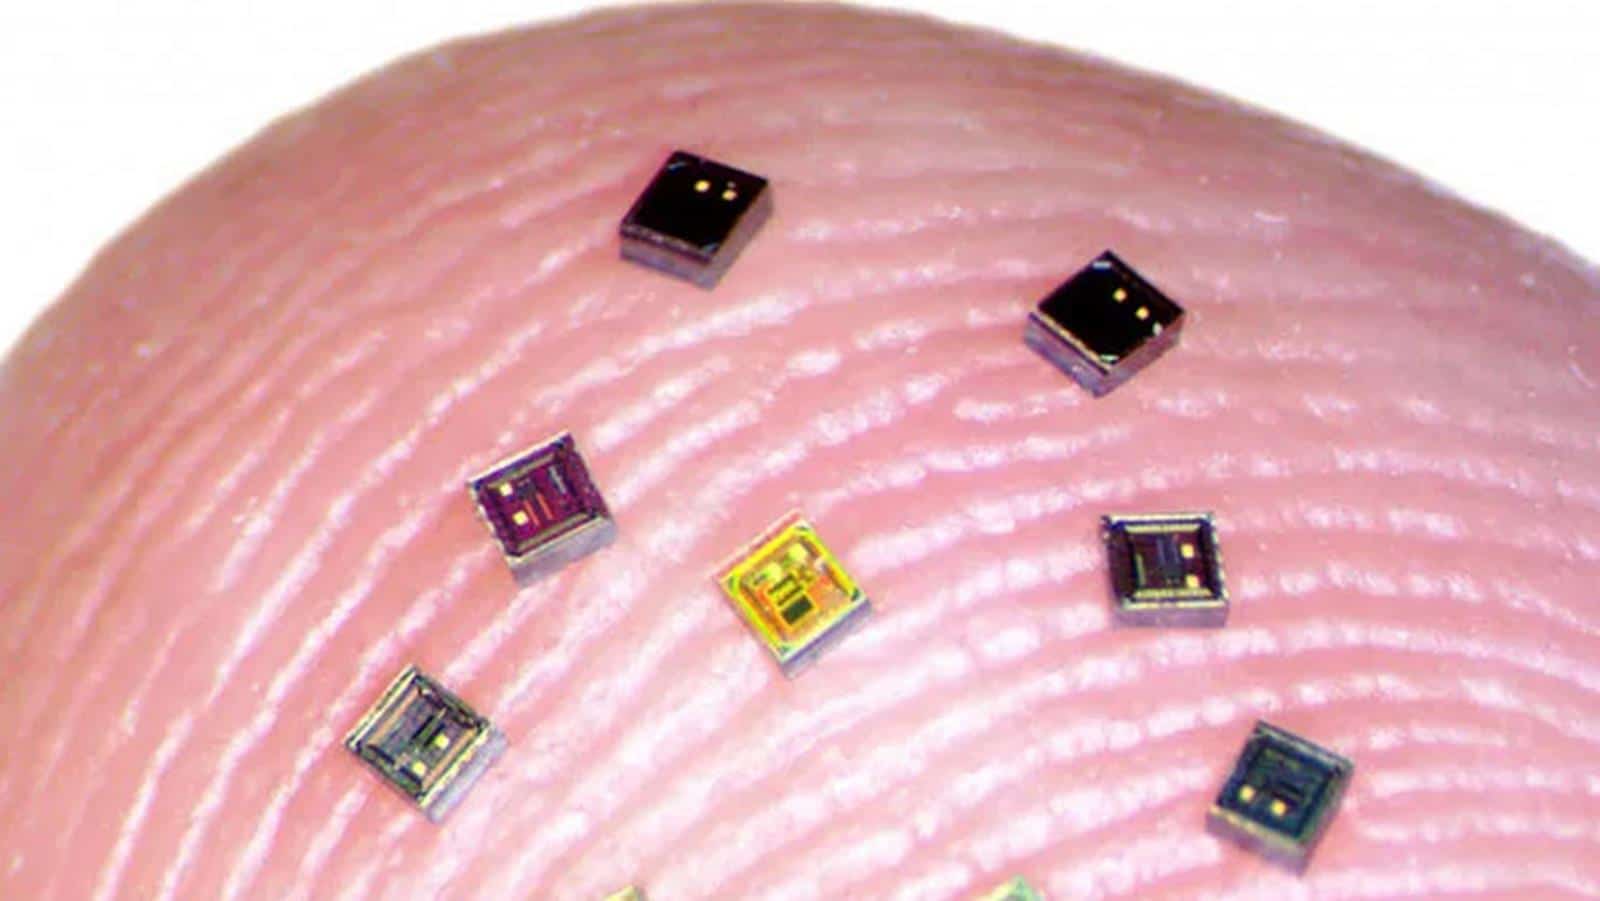 Scientists want to repair our brains with hundreds of microchips the size of a grain of salt